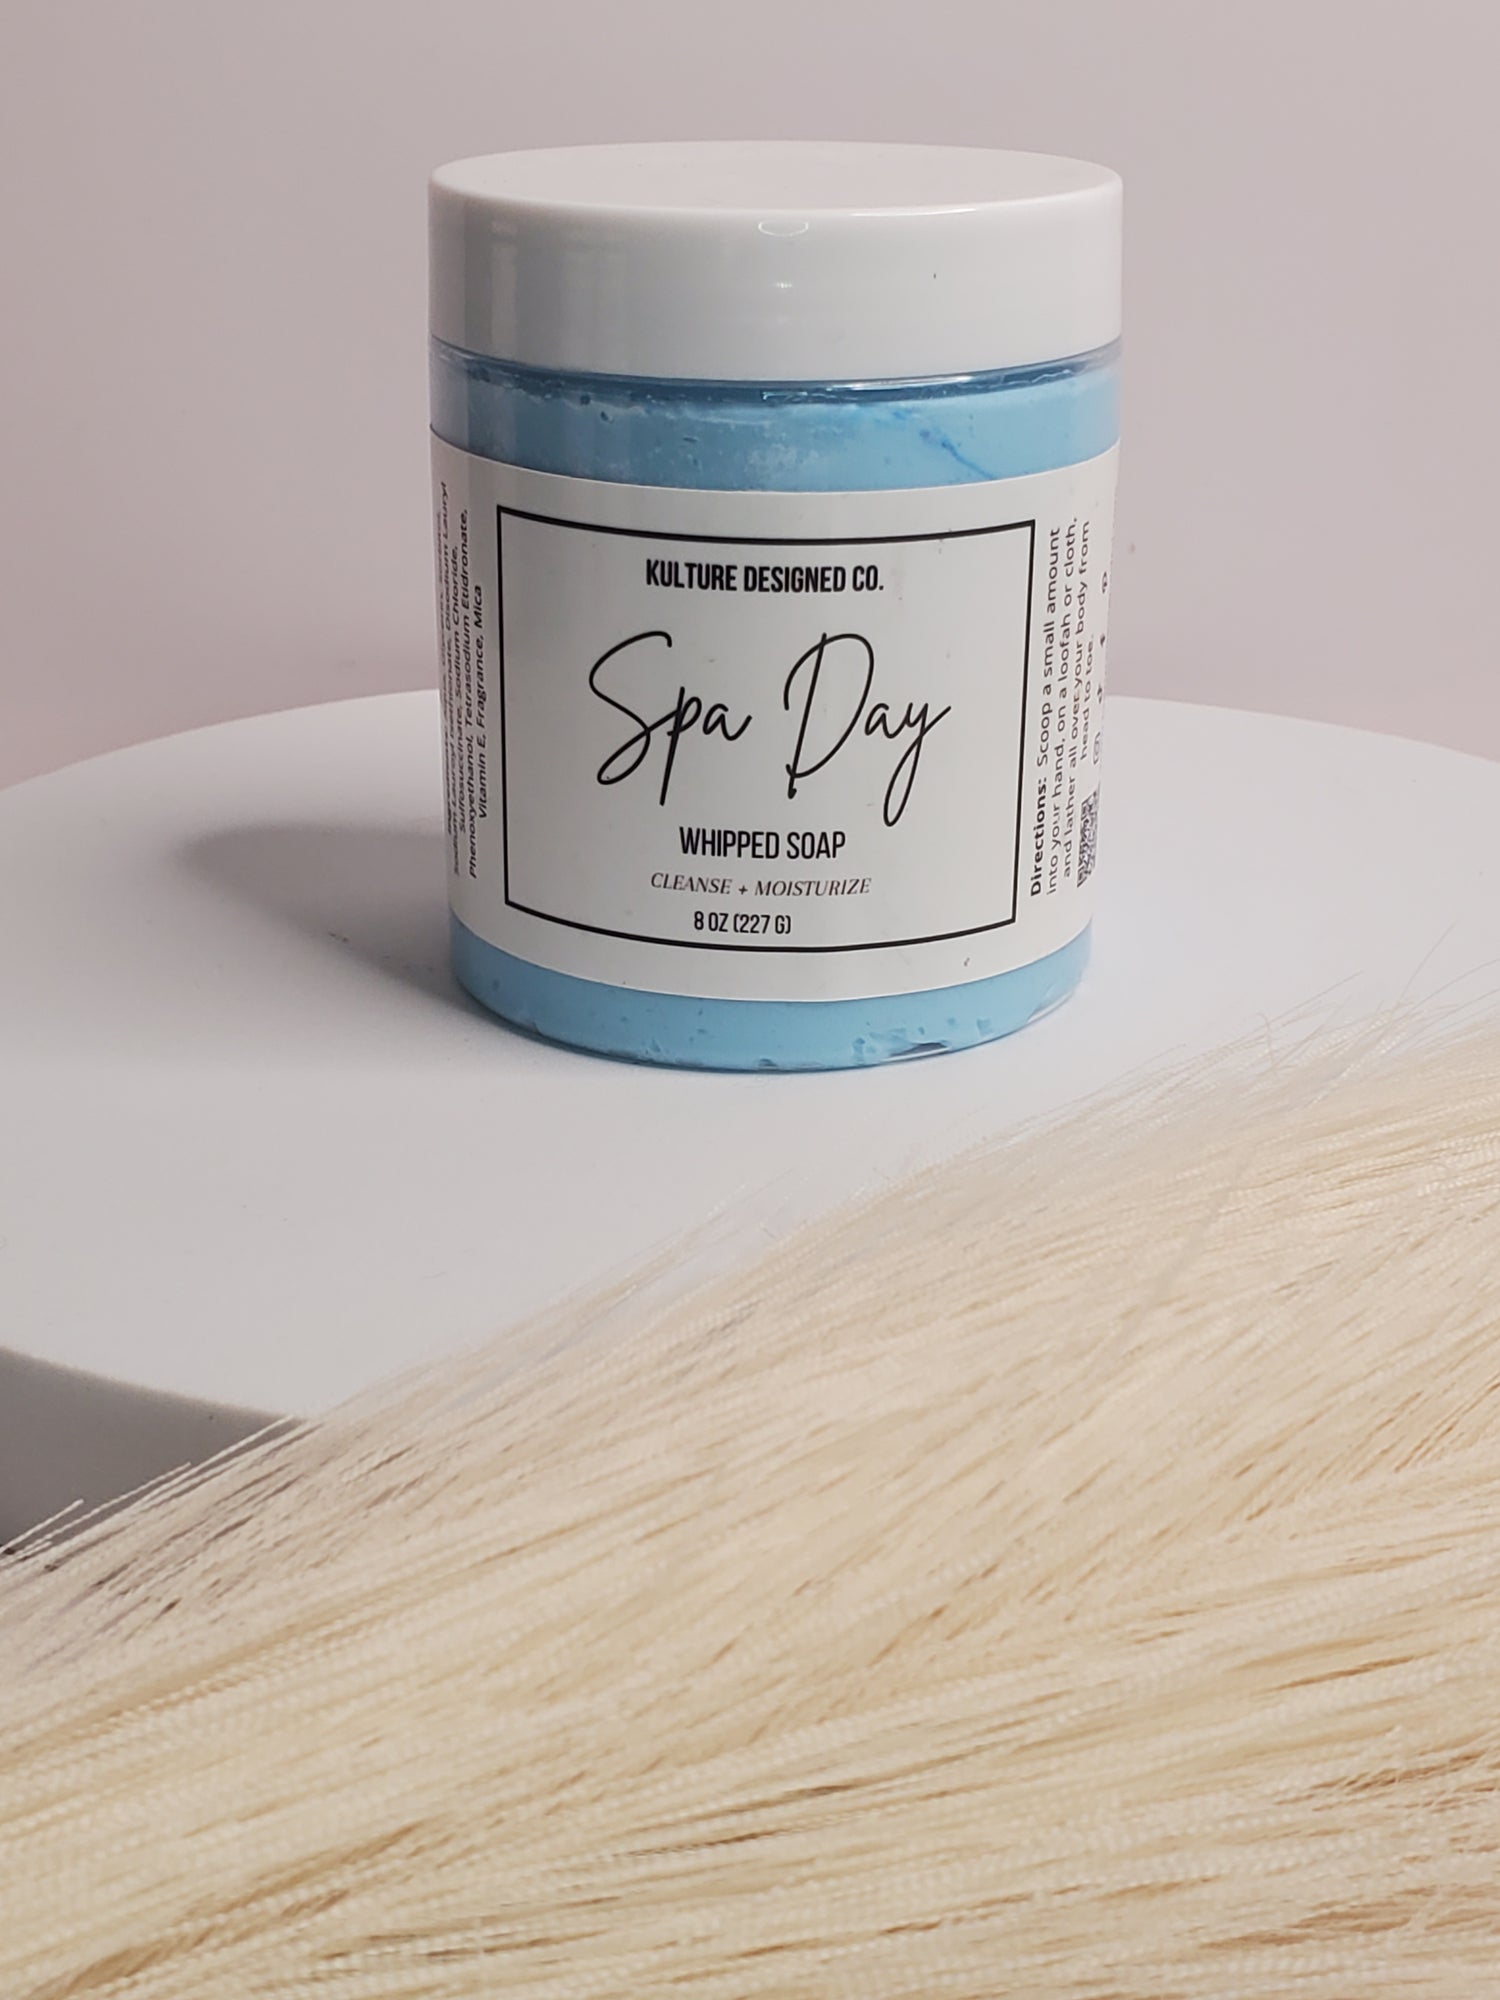 Spa Day | Whipped Soap - Kulture Designed Co.